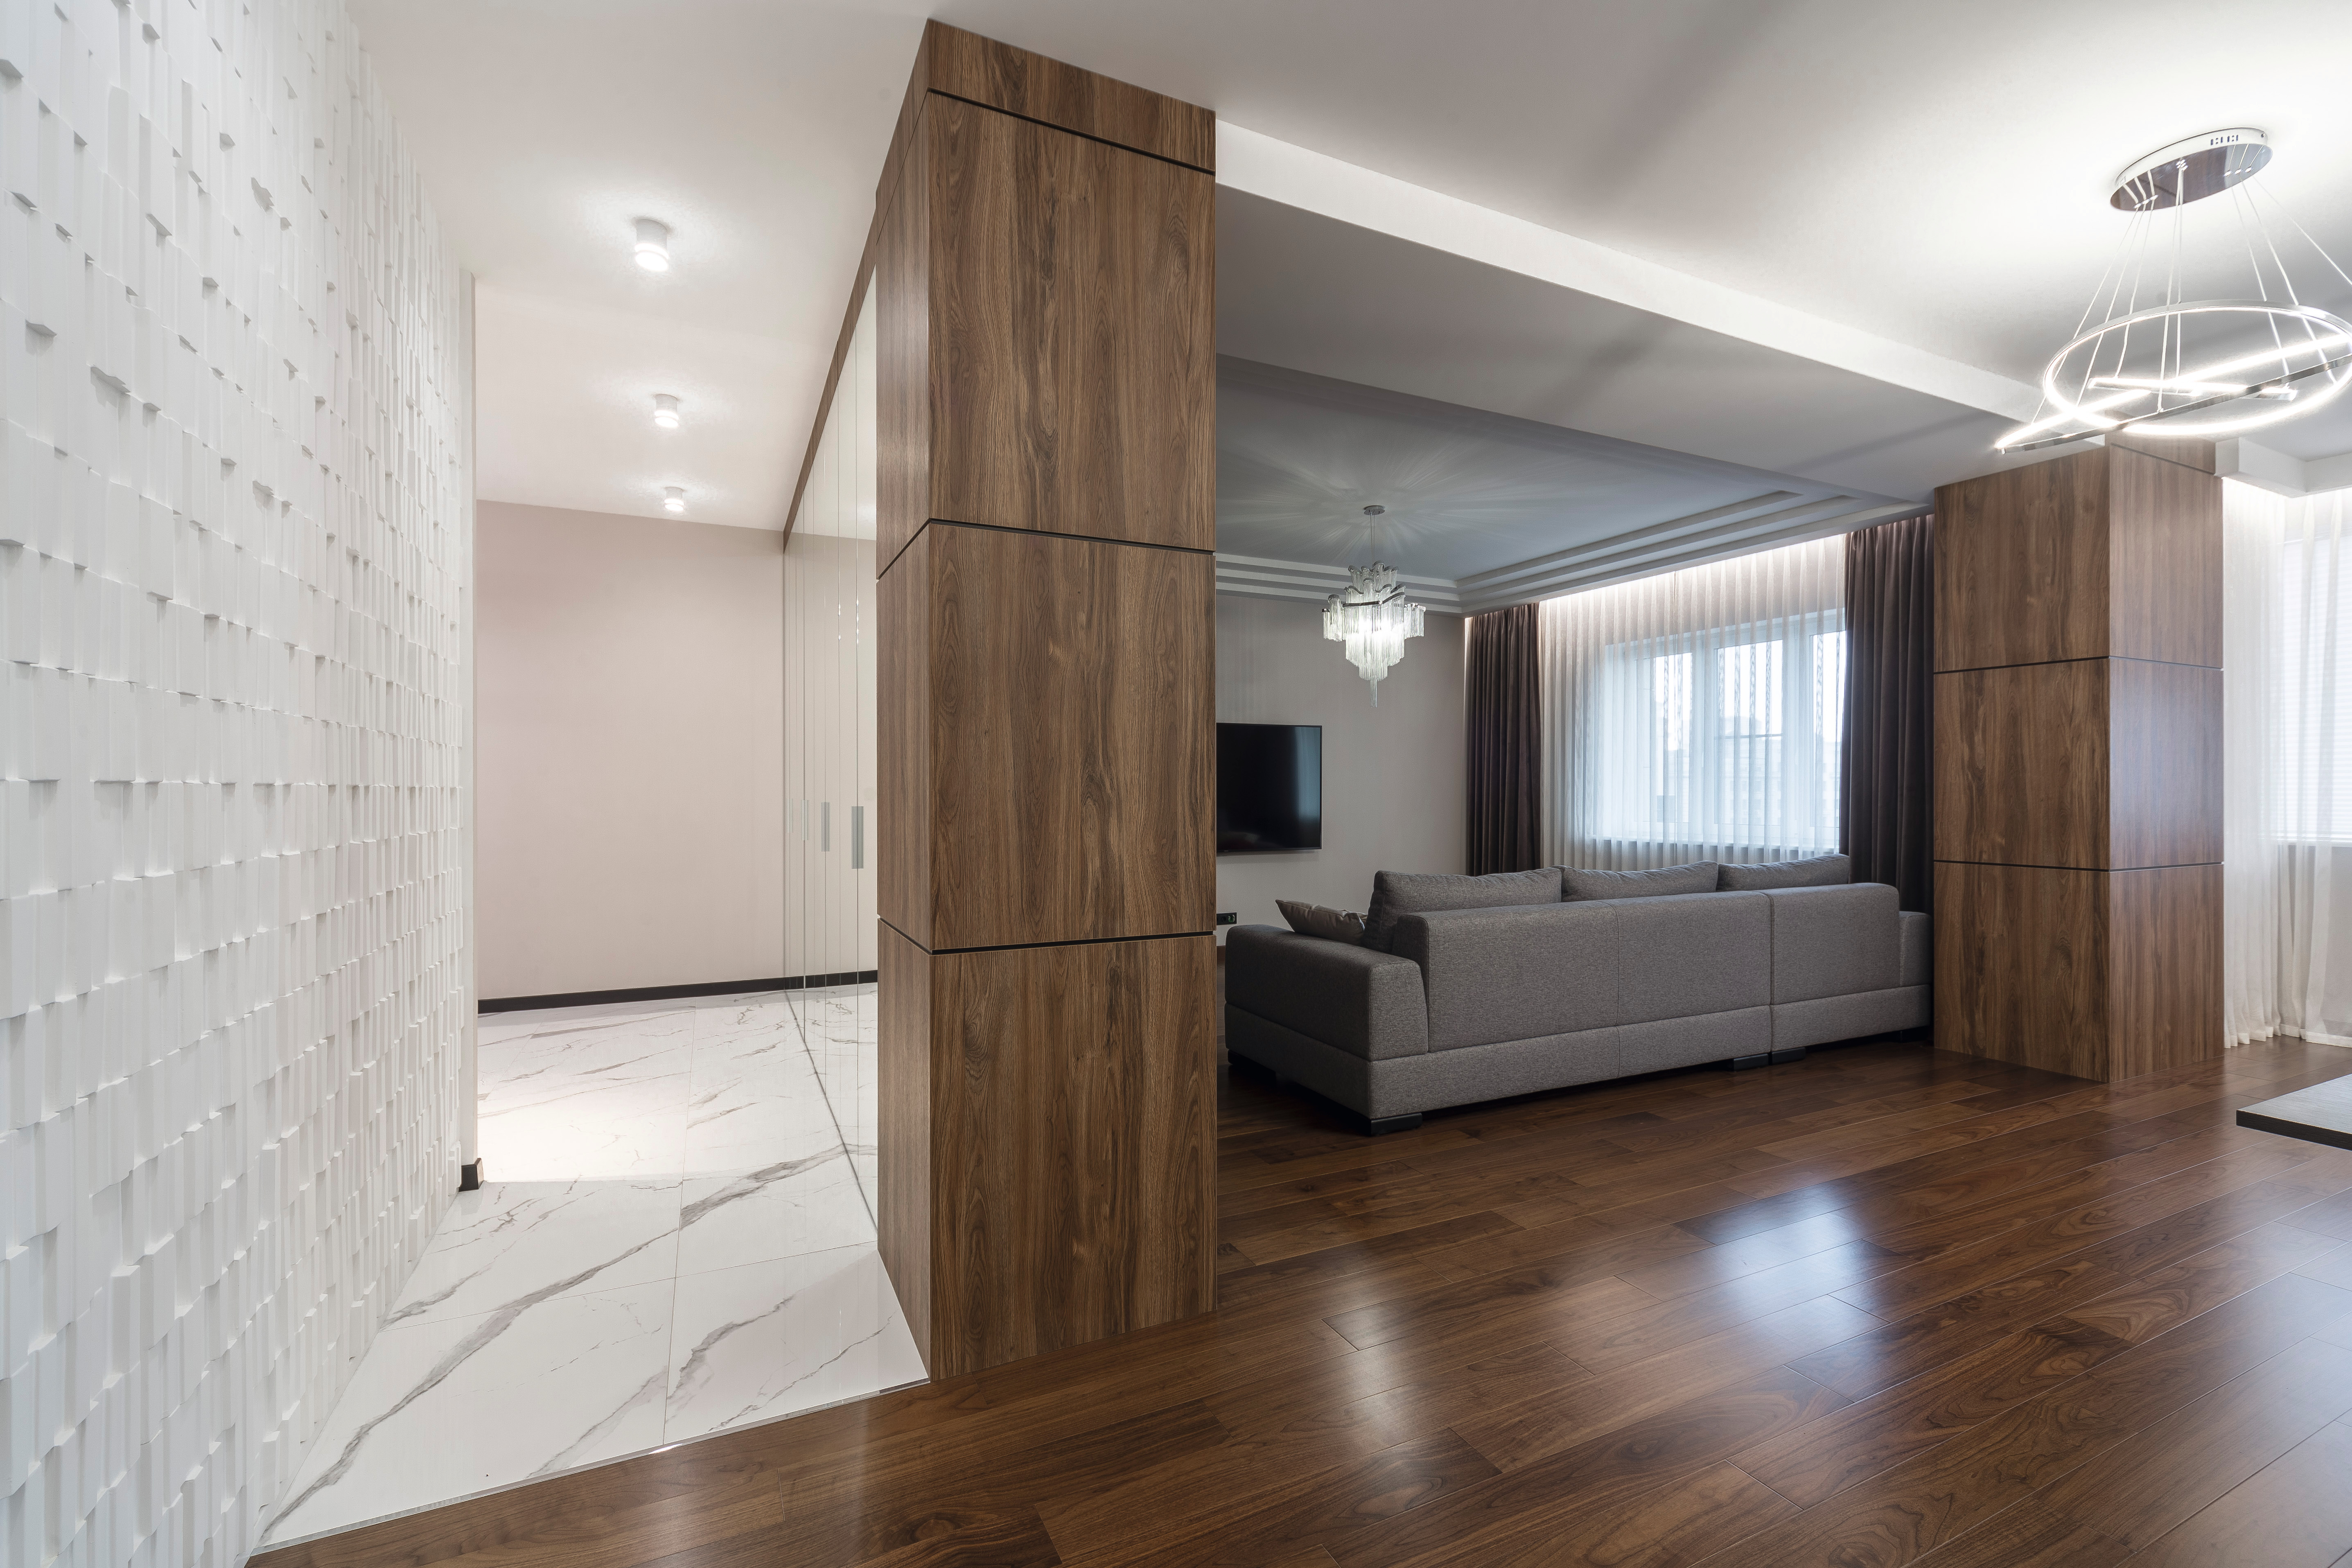 Seamless connection of melamine faced chipboards is a special feature of this project, since all boards were joined at an angle of 45 degrees